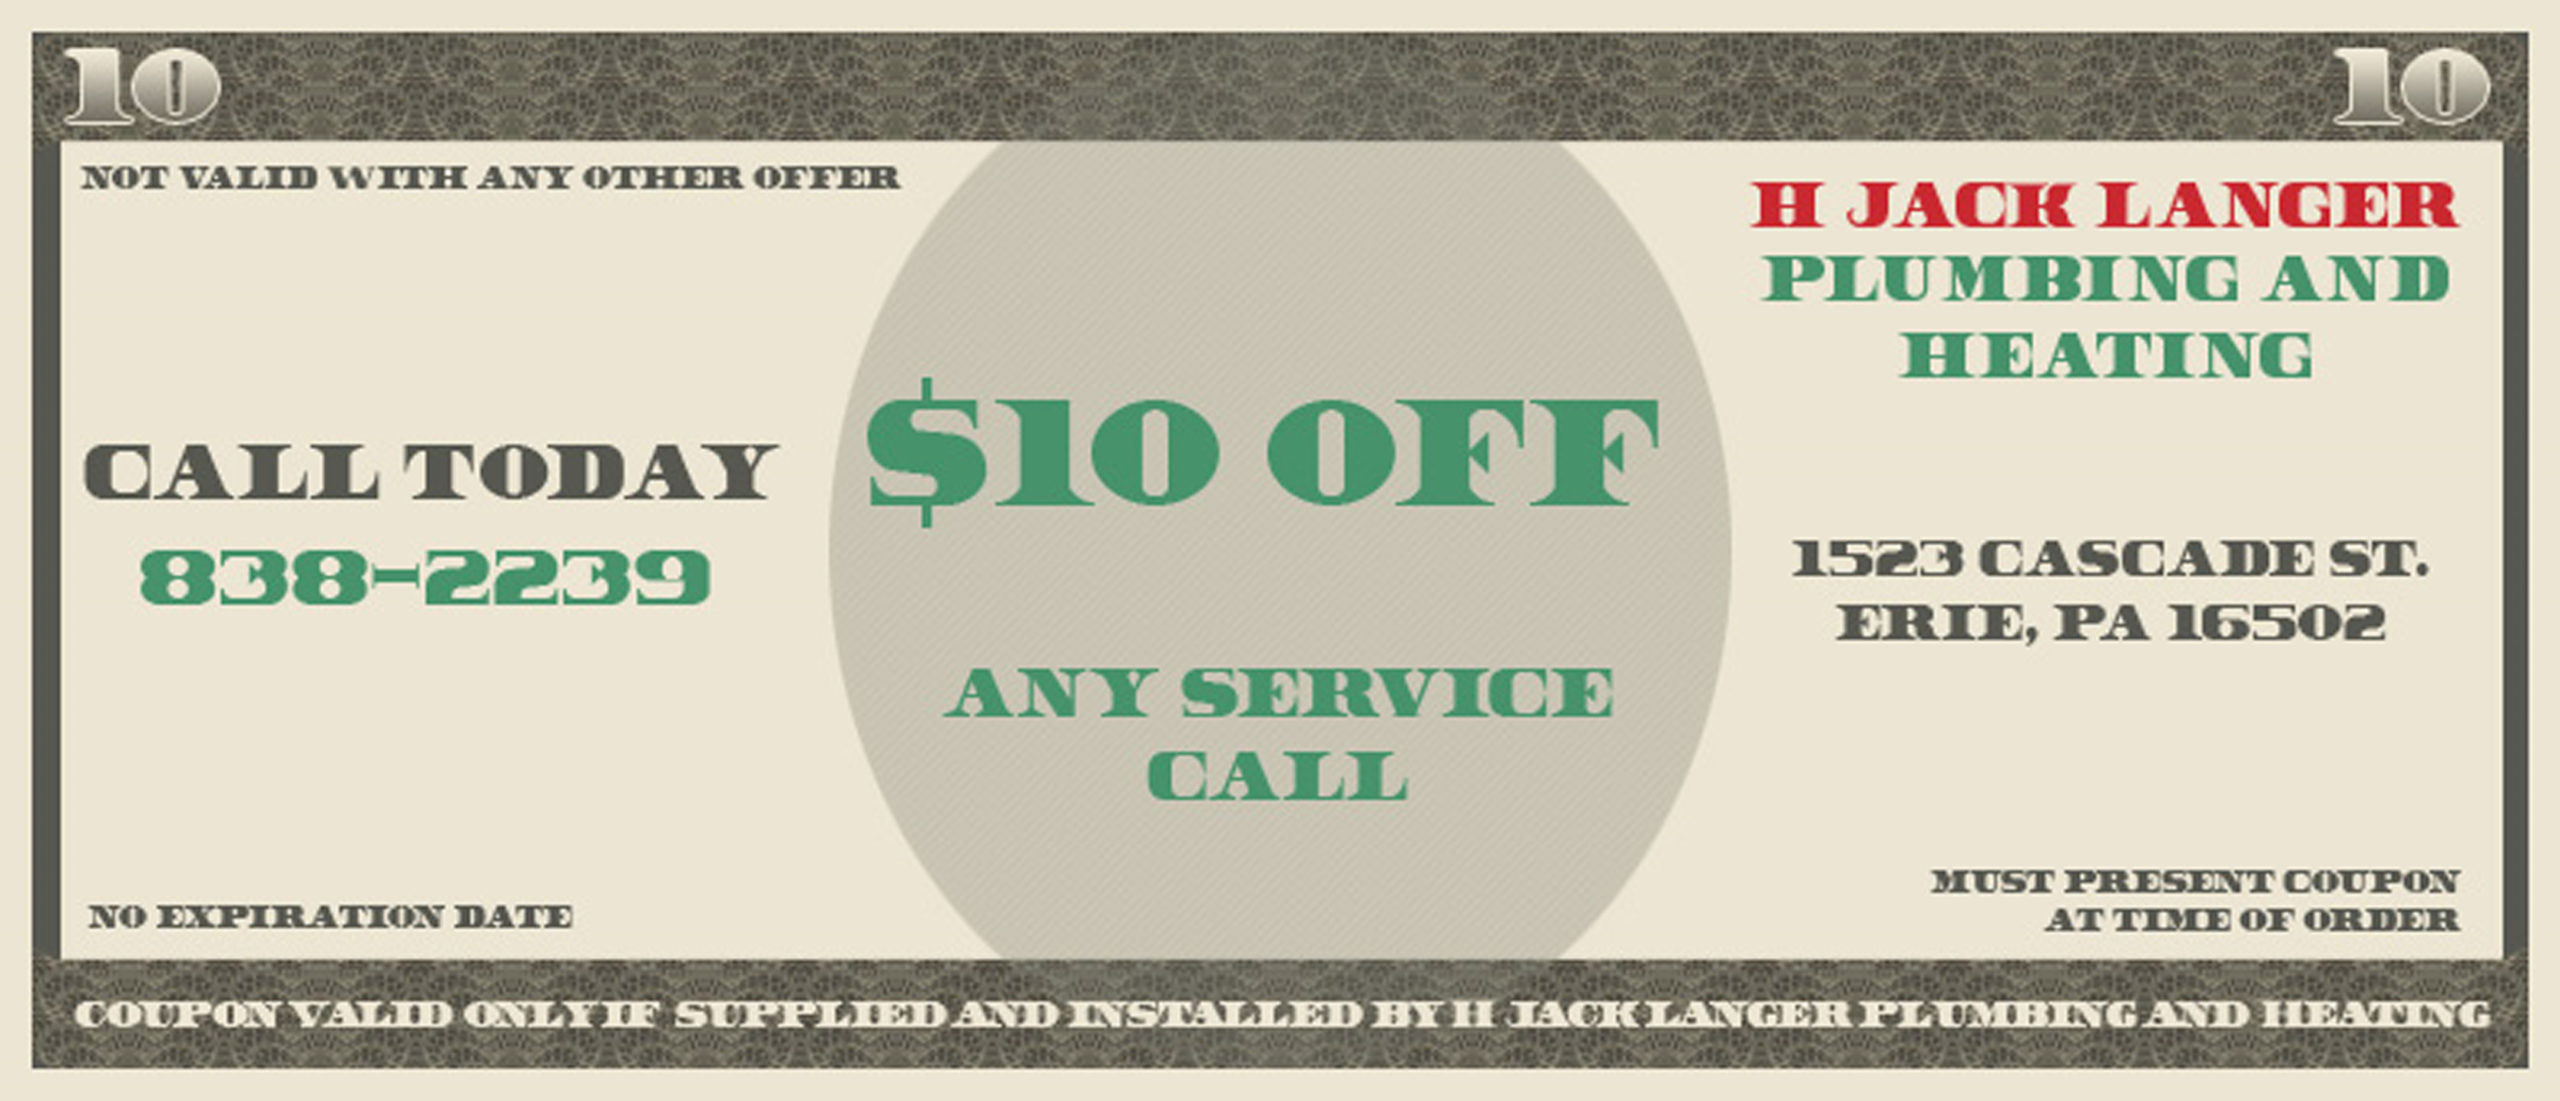 $10 Off Any Service Call